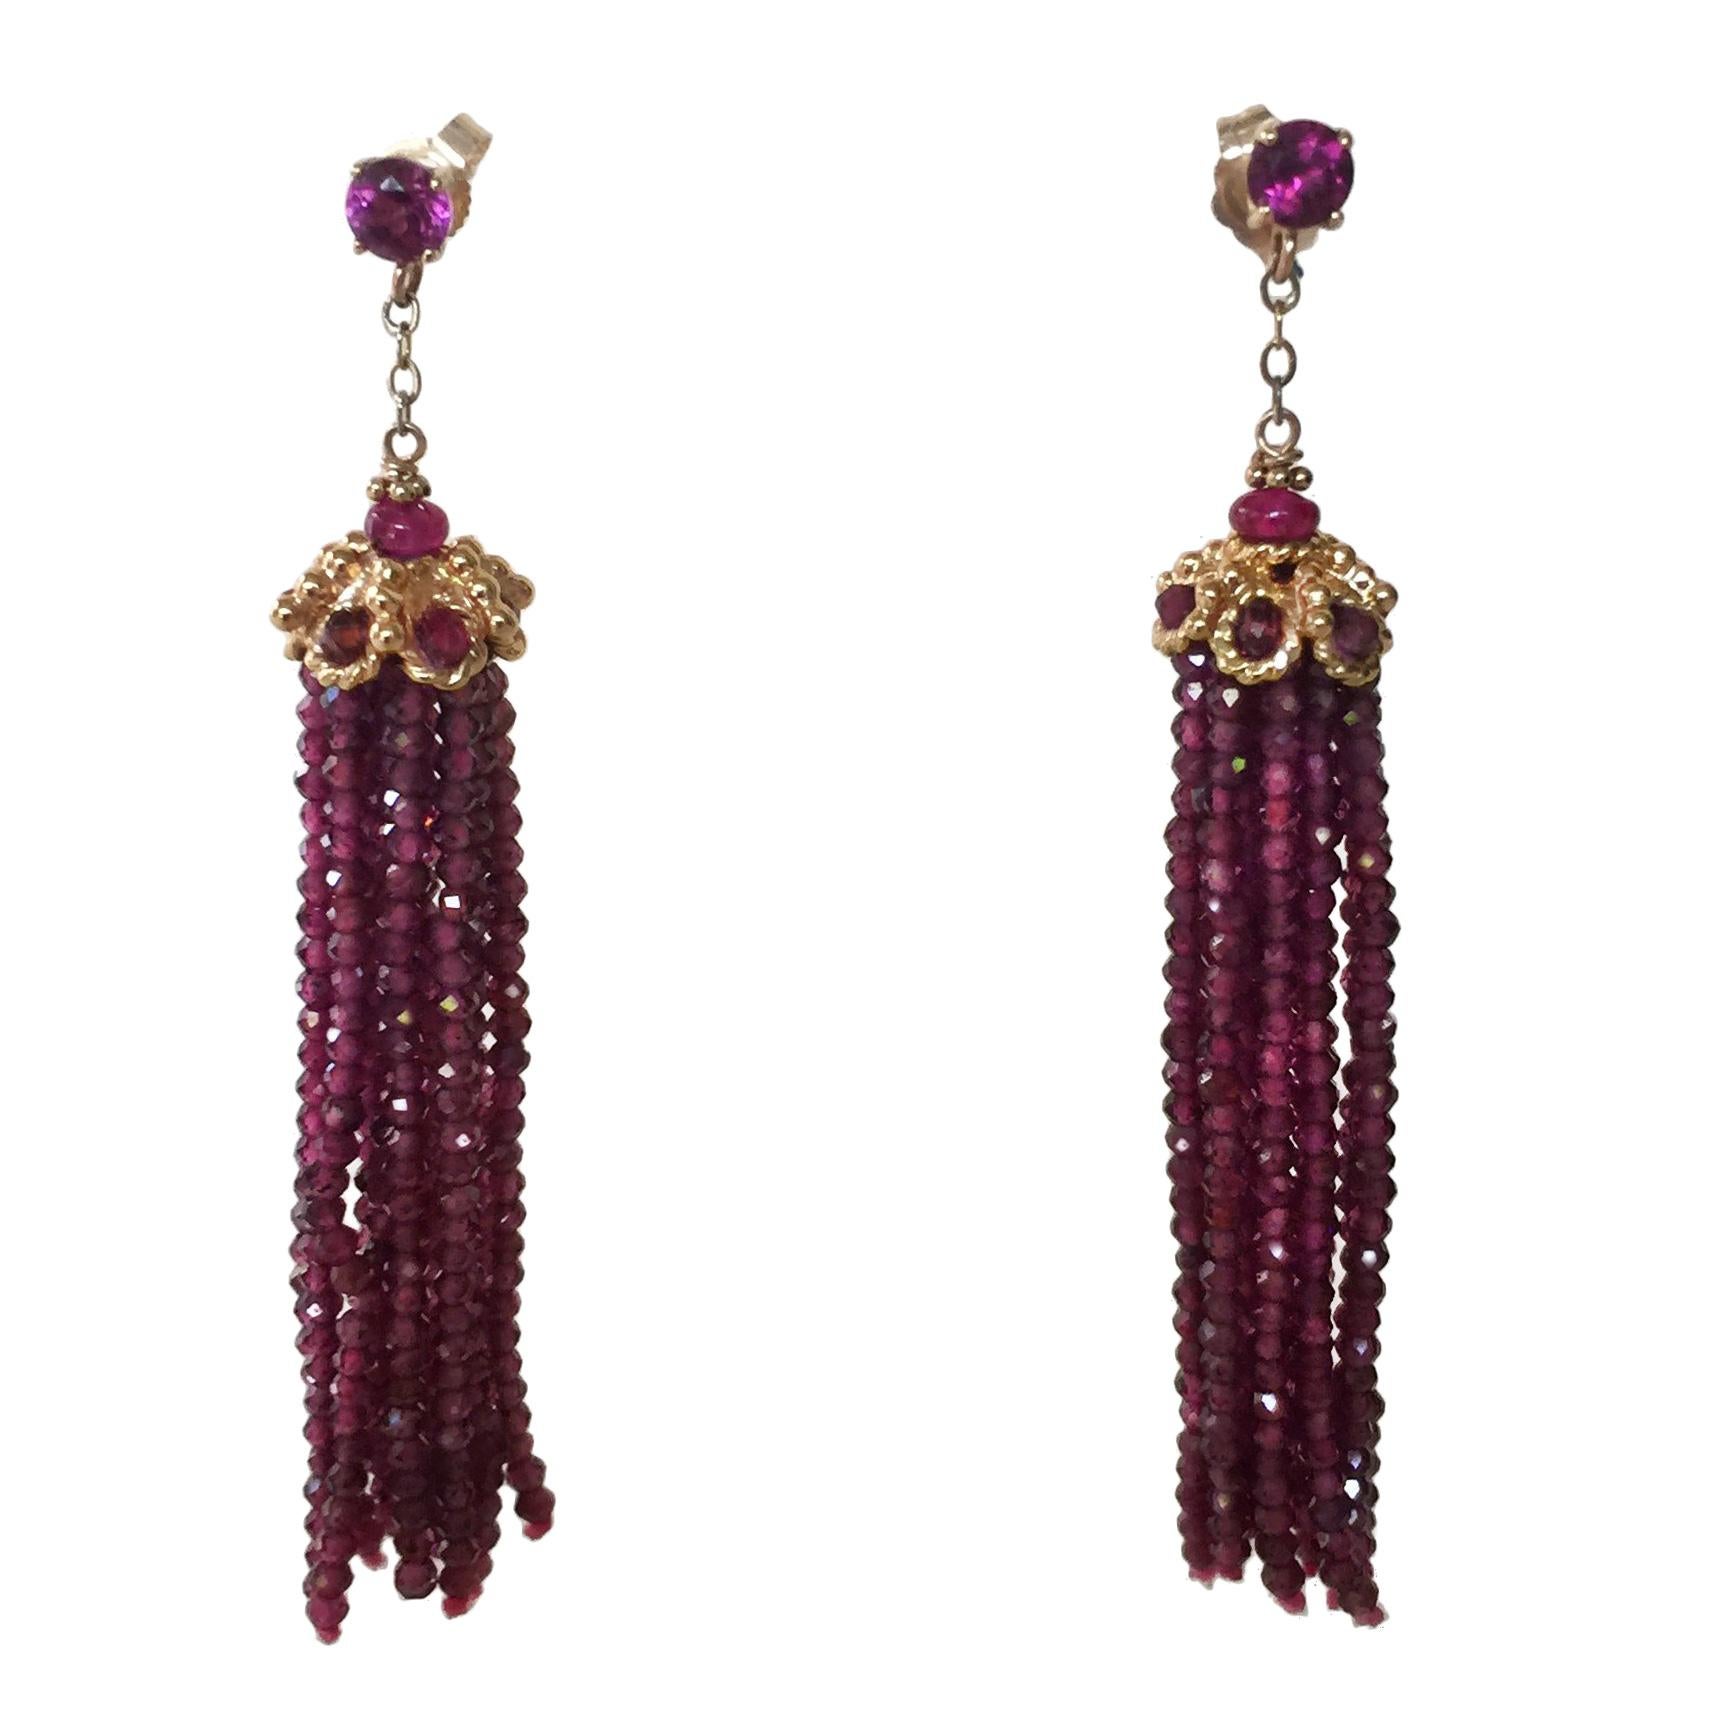  Marina J Faceted Amethyst  Stud Tassel Dangle Earrings and 14K Yellow Gold  For Sale